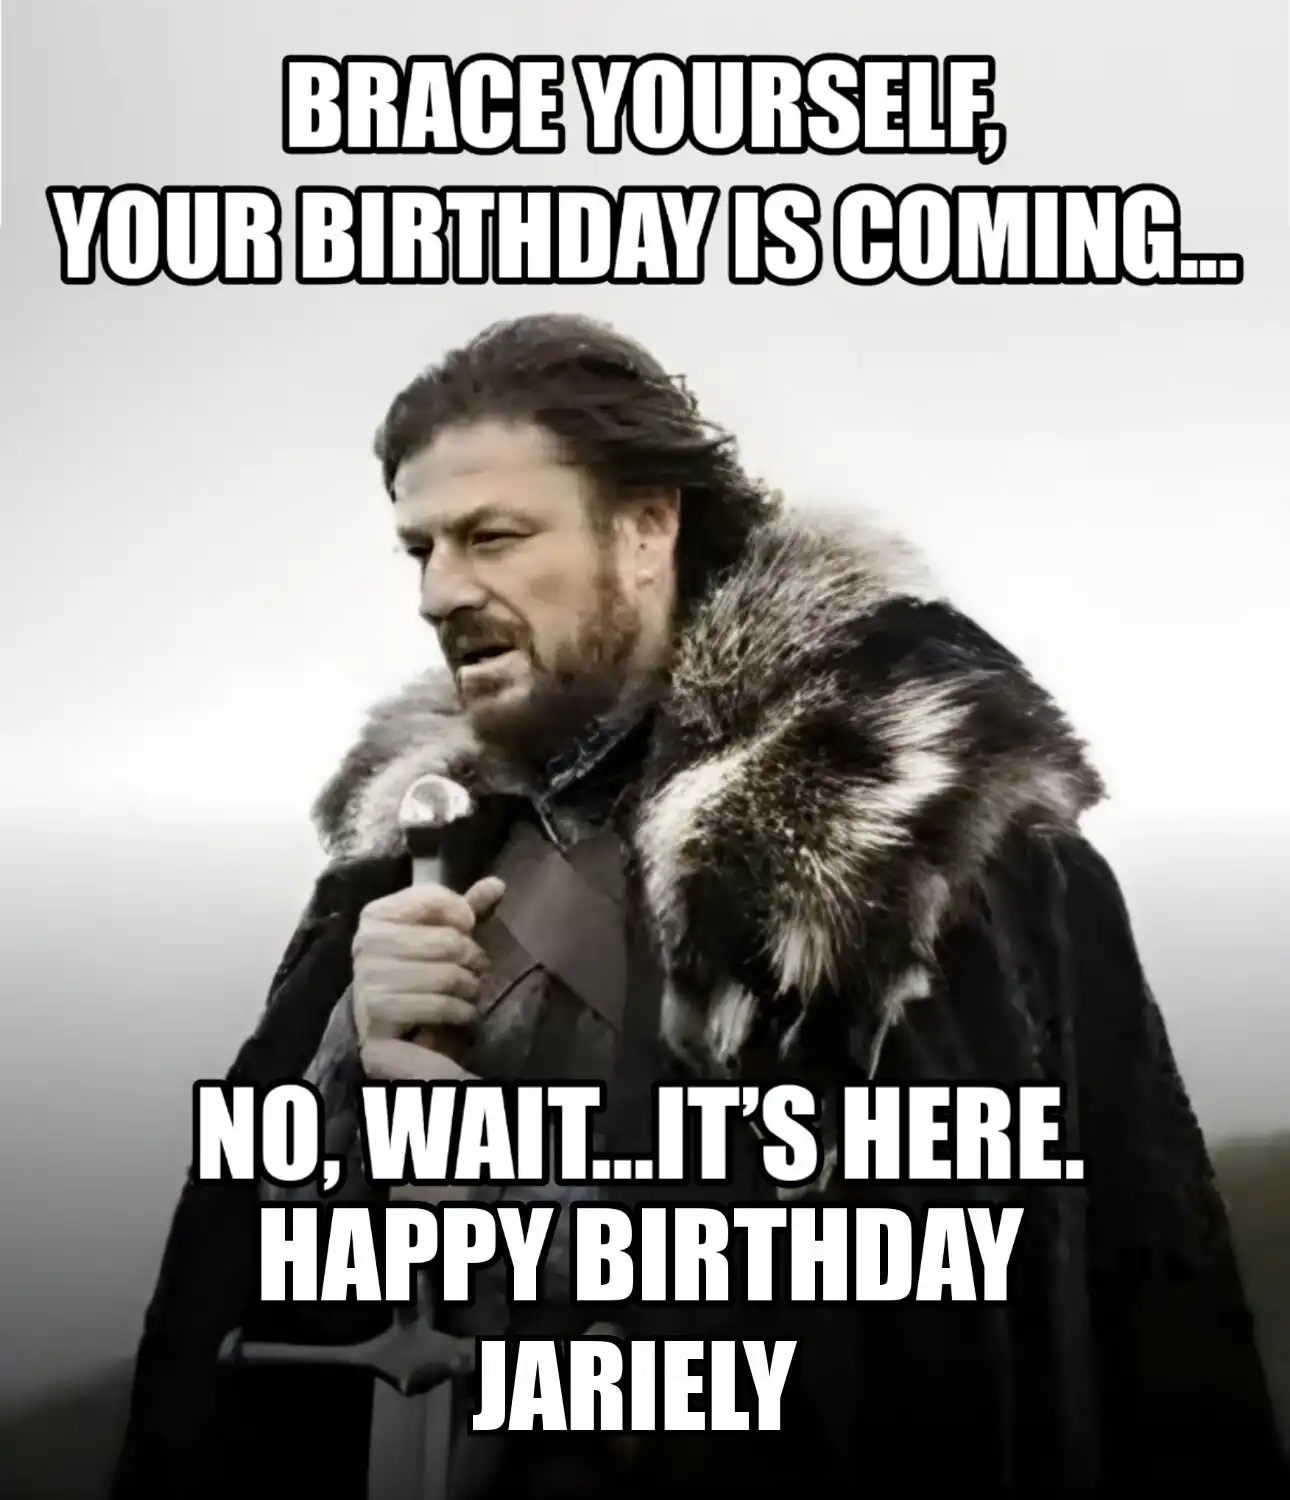 Happy Birthday Jariely Brace Yourself Your Birthday Is Coming Meme